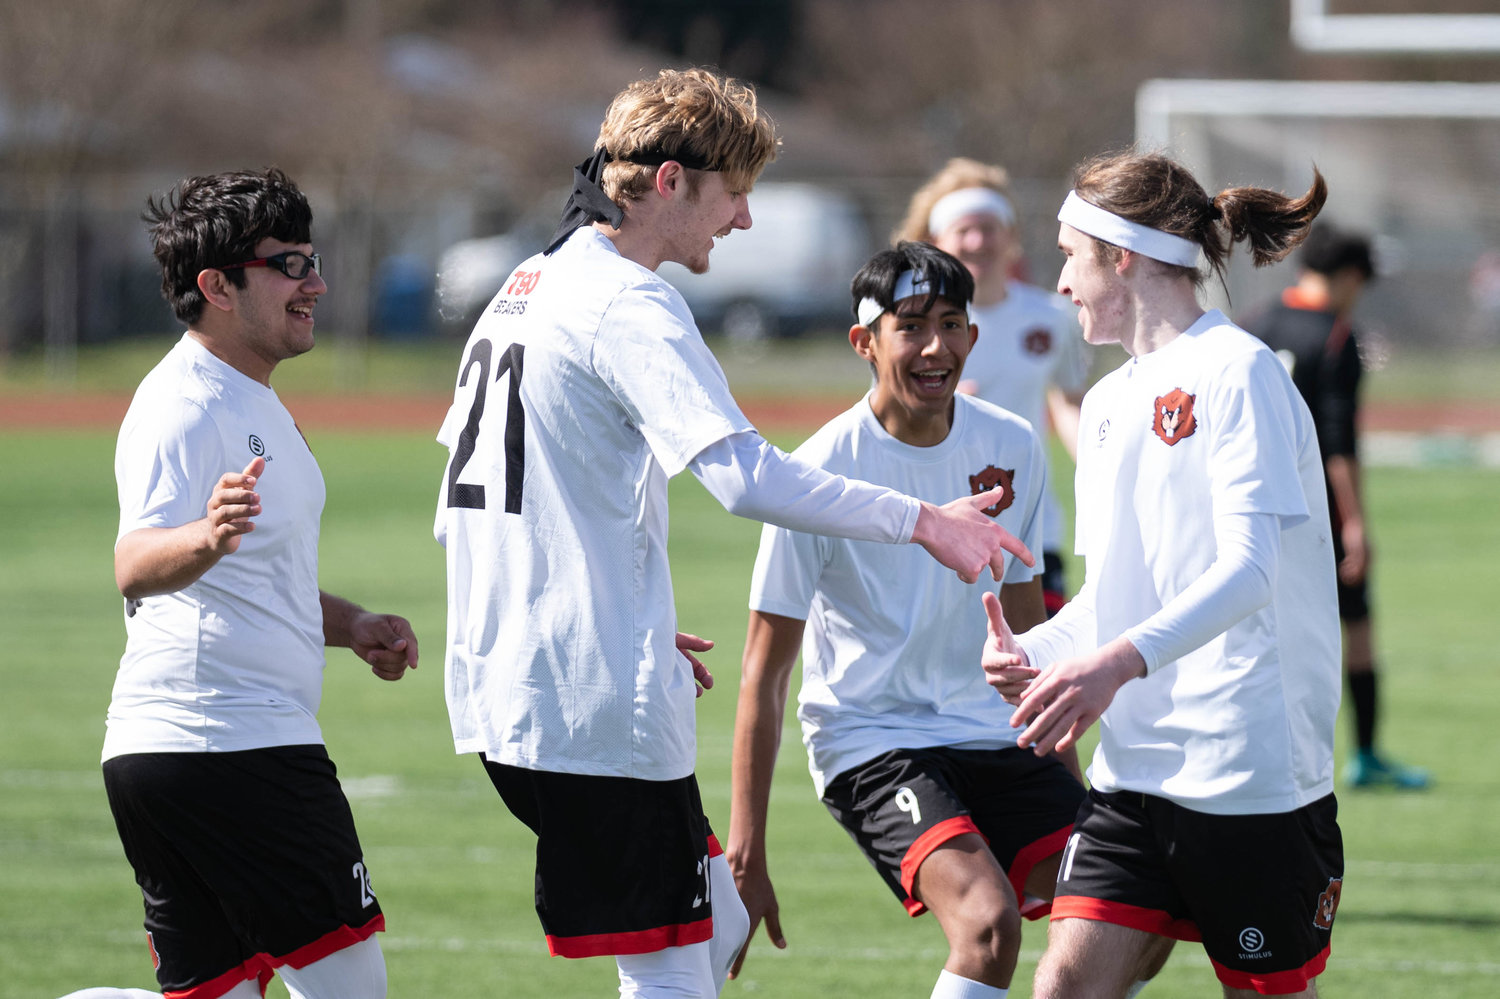 Tenino celebrates its lone goal against Centralia in a 1-0 win at Tiger Stadium on March 19.